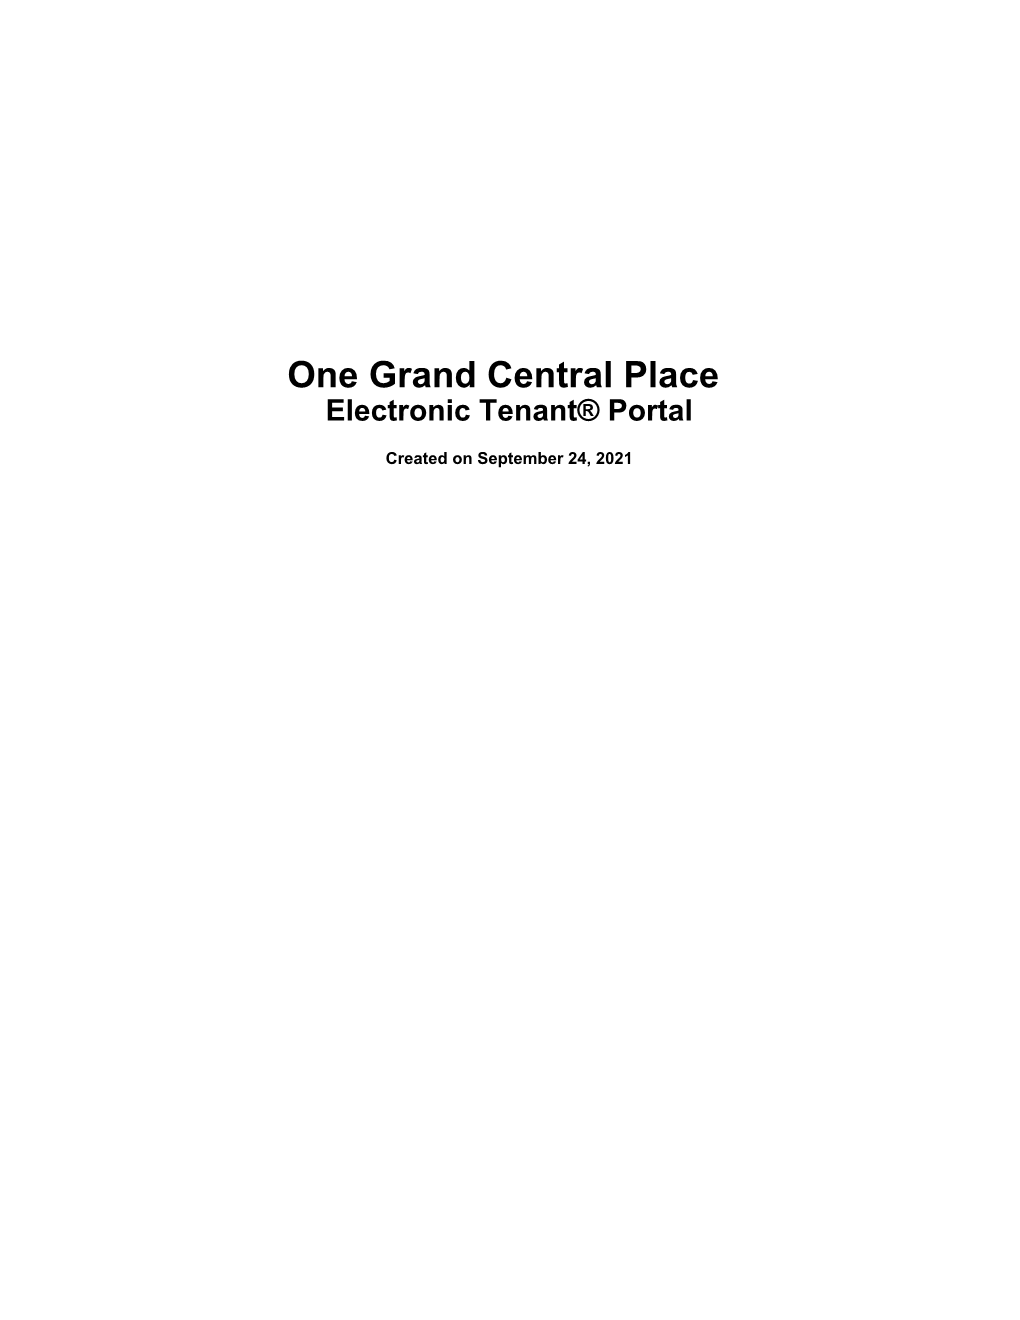 One Grand Central Place Electronic Tenant® Portal